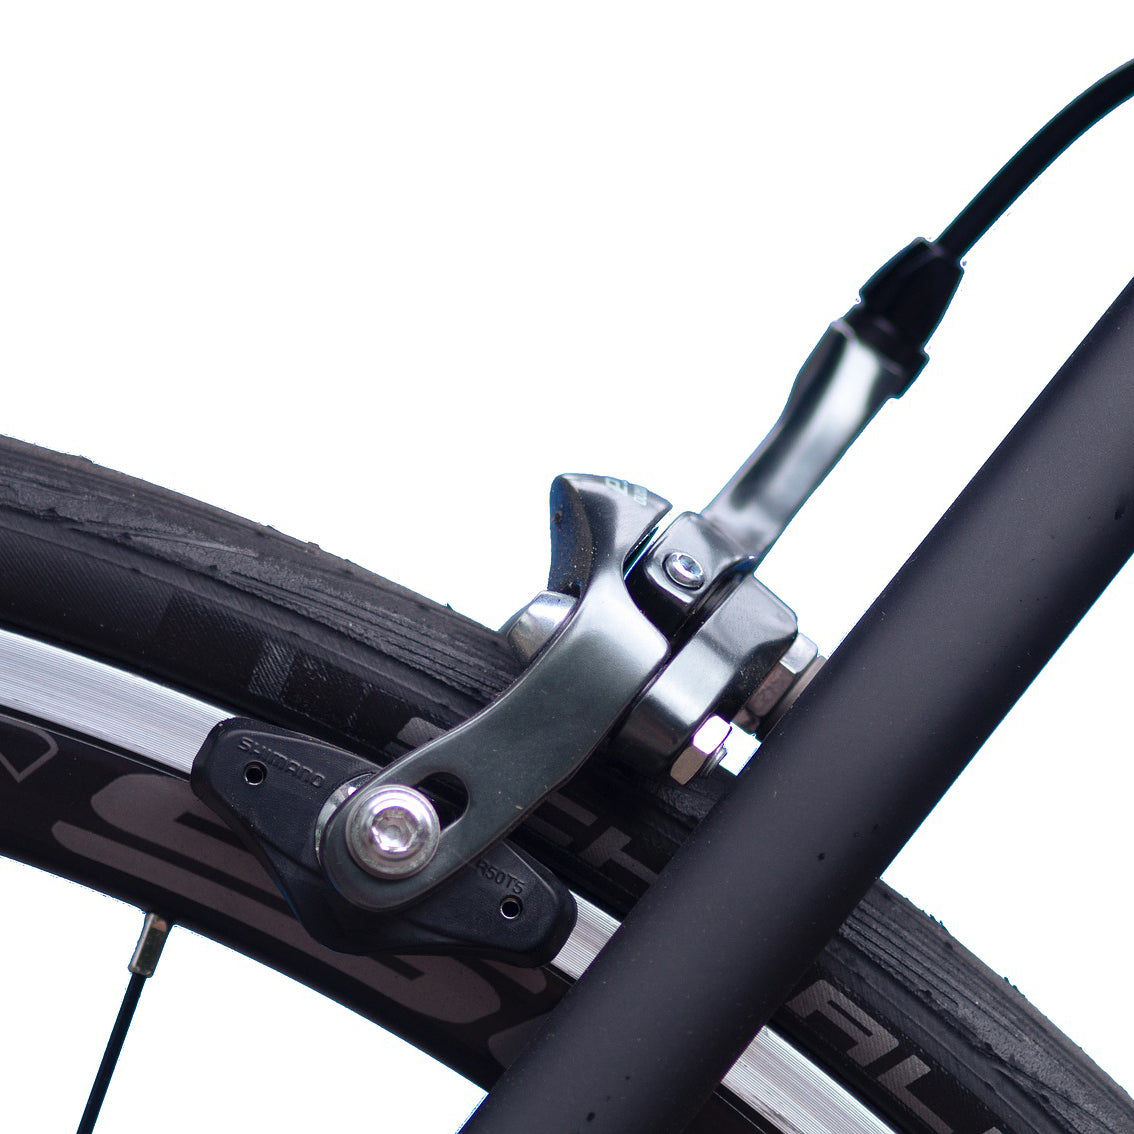 Bike Brake Types - Which is the Best? Learn now – I LOCK IT